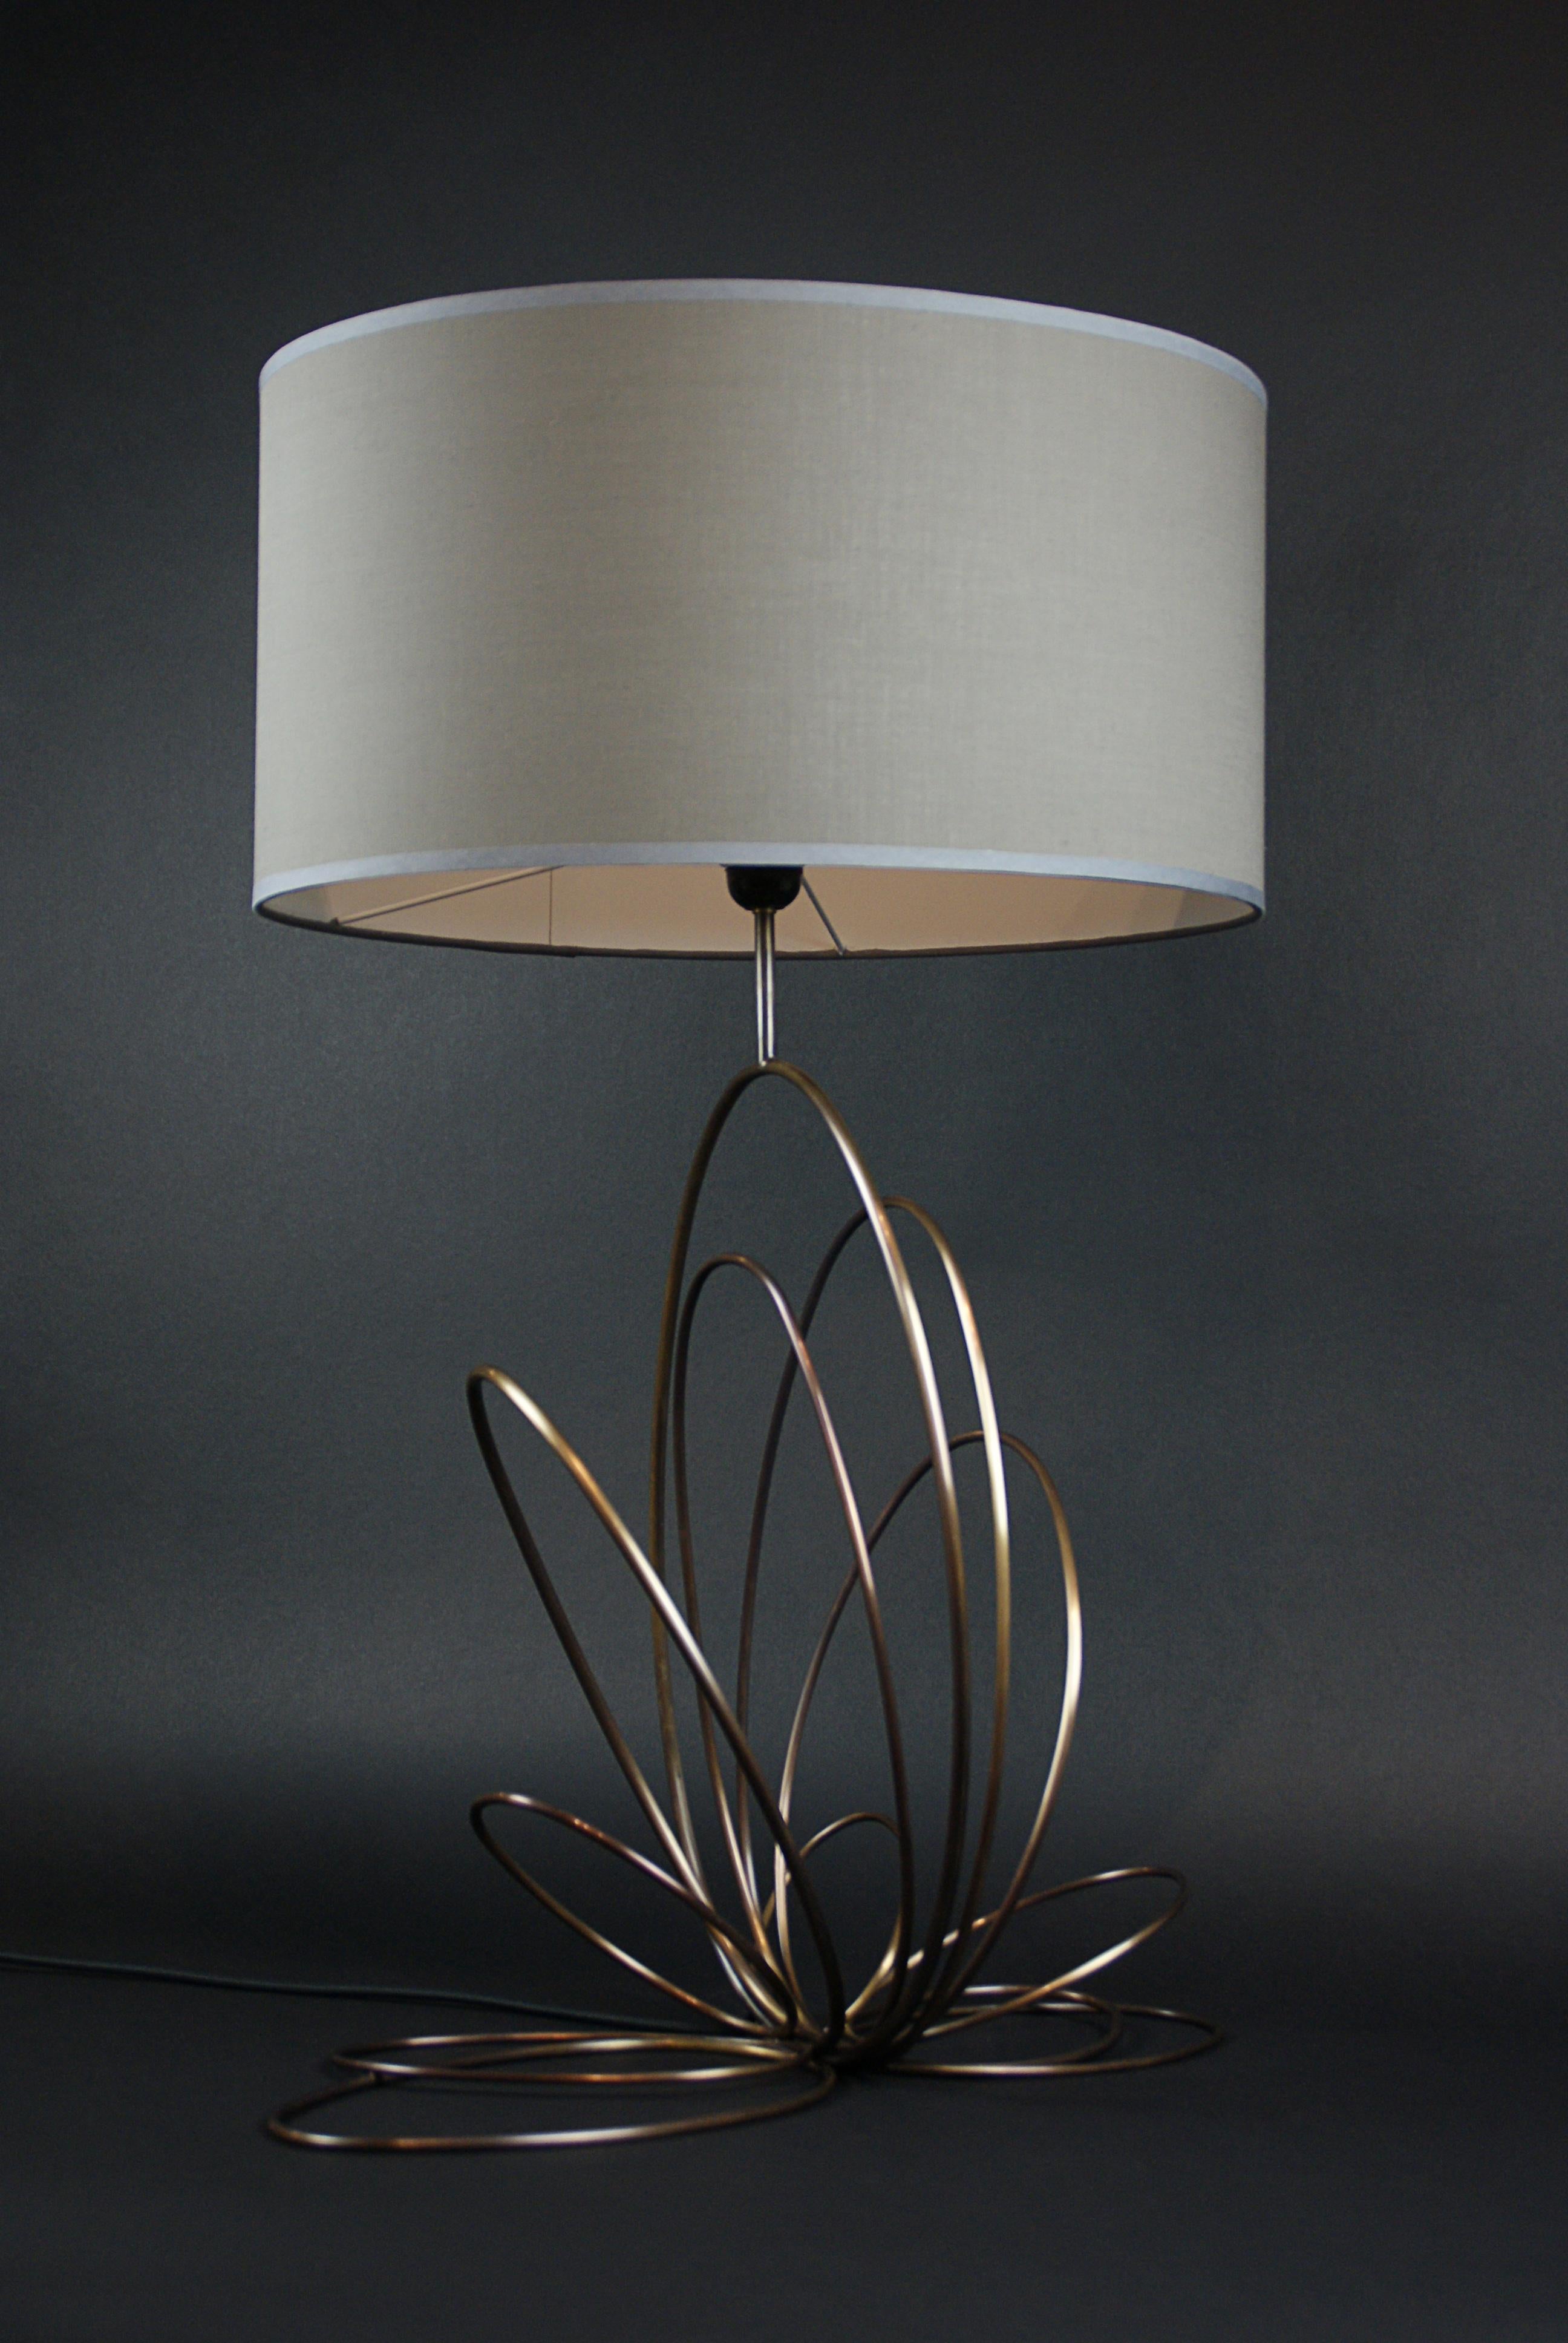 Ellipse 3 Table Lamp by Atelier Demichelis
Dimensions: W 53 x D 40 x H 80 cm
Materials: patinated brass, grey fabric shade

Laura Demichelis

Laura was born & brought up in Provence, in the south of France.
Trained at the École Boulle in Paris, she